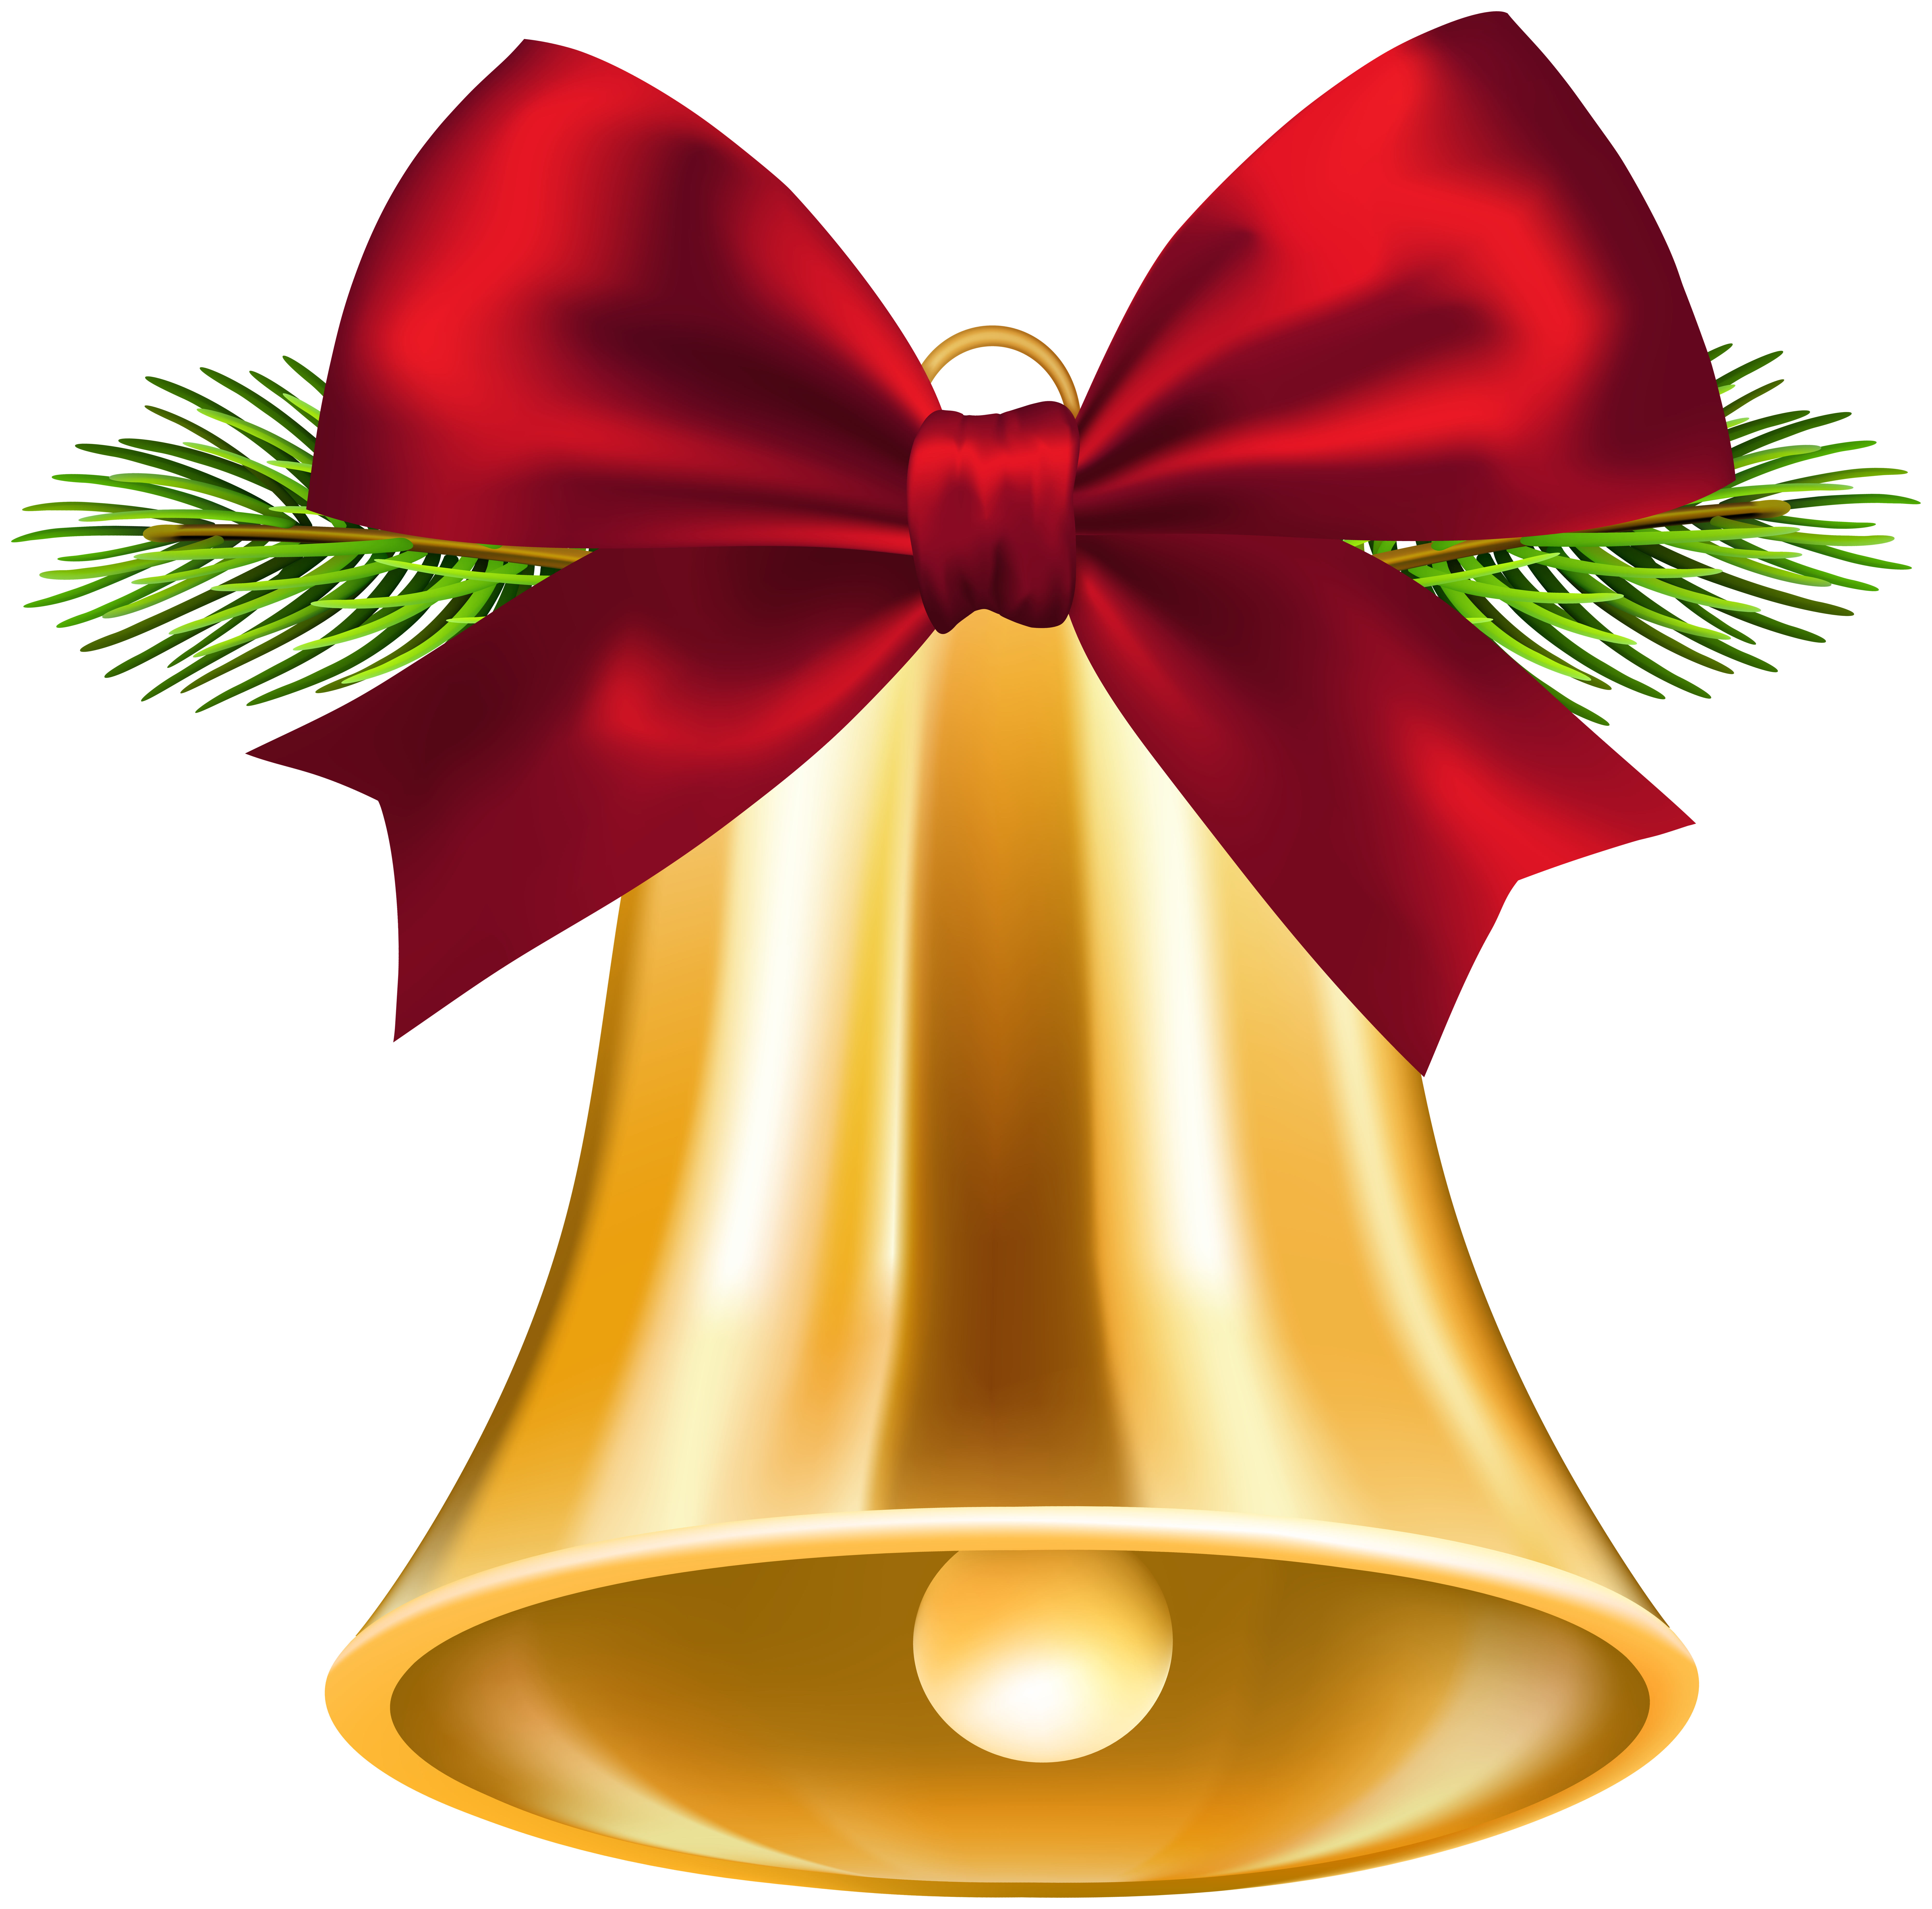 Christmas Bell With Bow And Leaves, Bell, Christmas, Outline PNG  Transparent Image and Clipart for Free Download